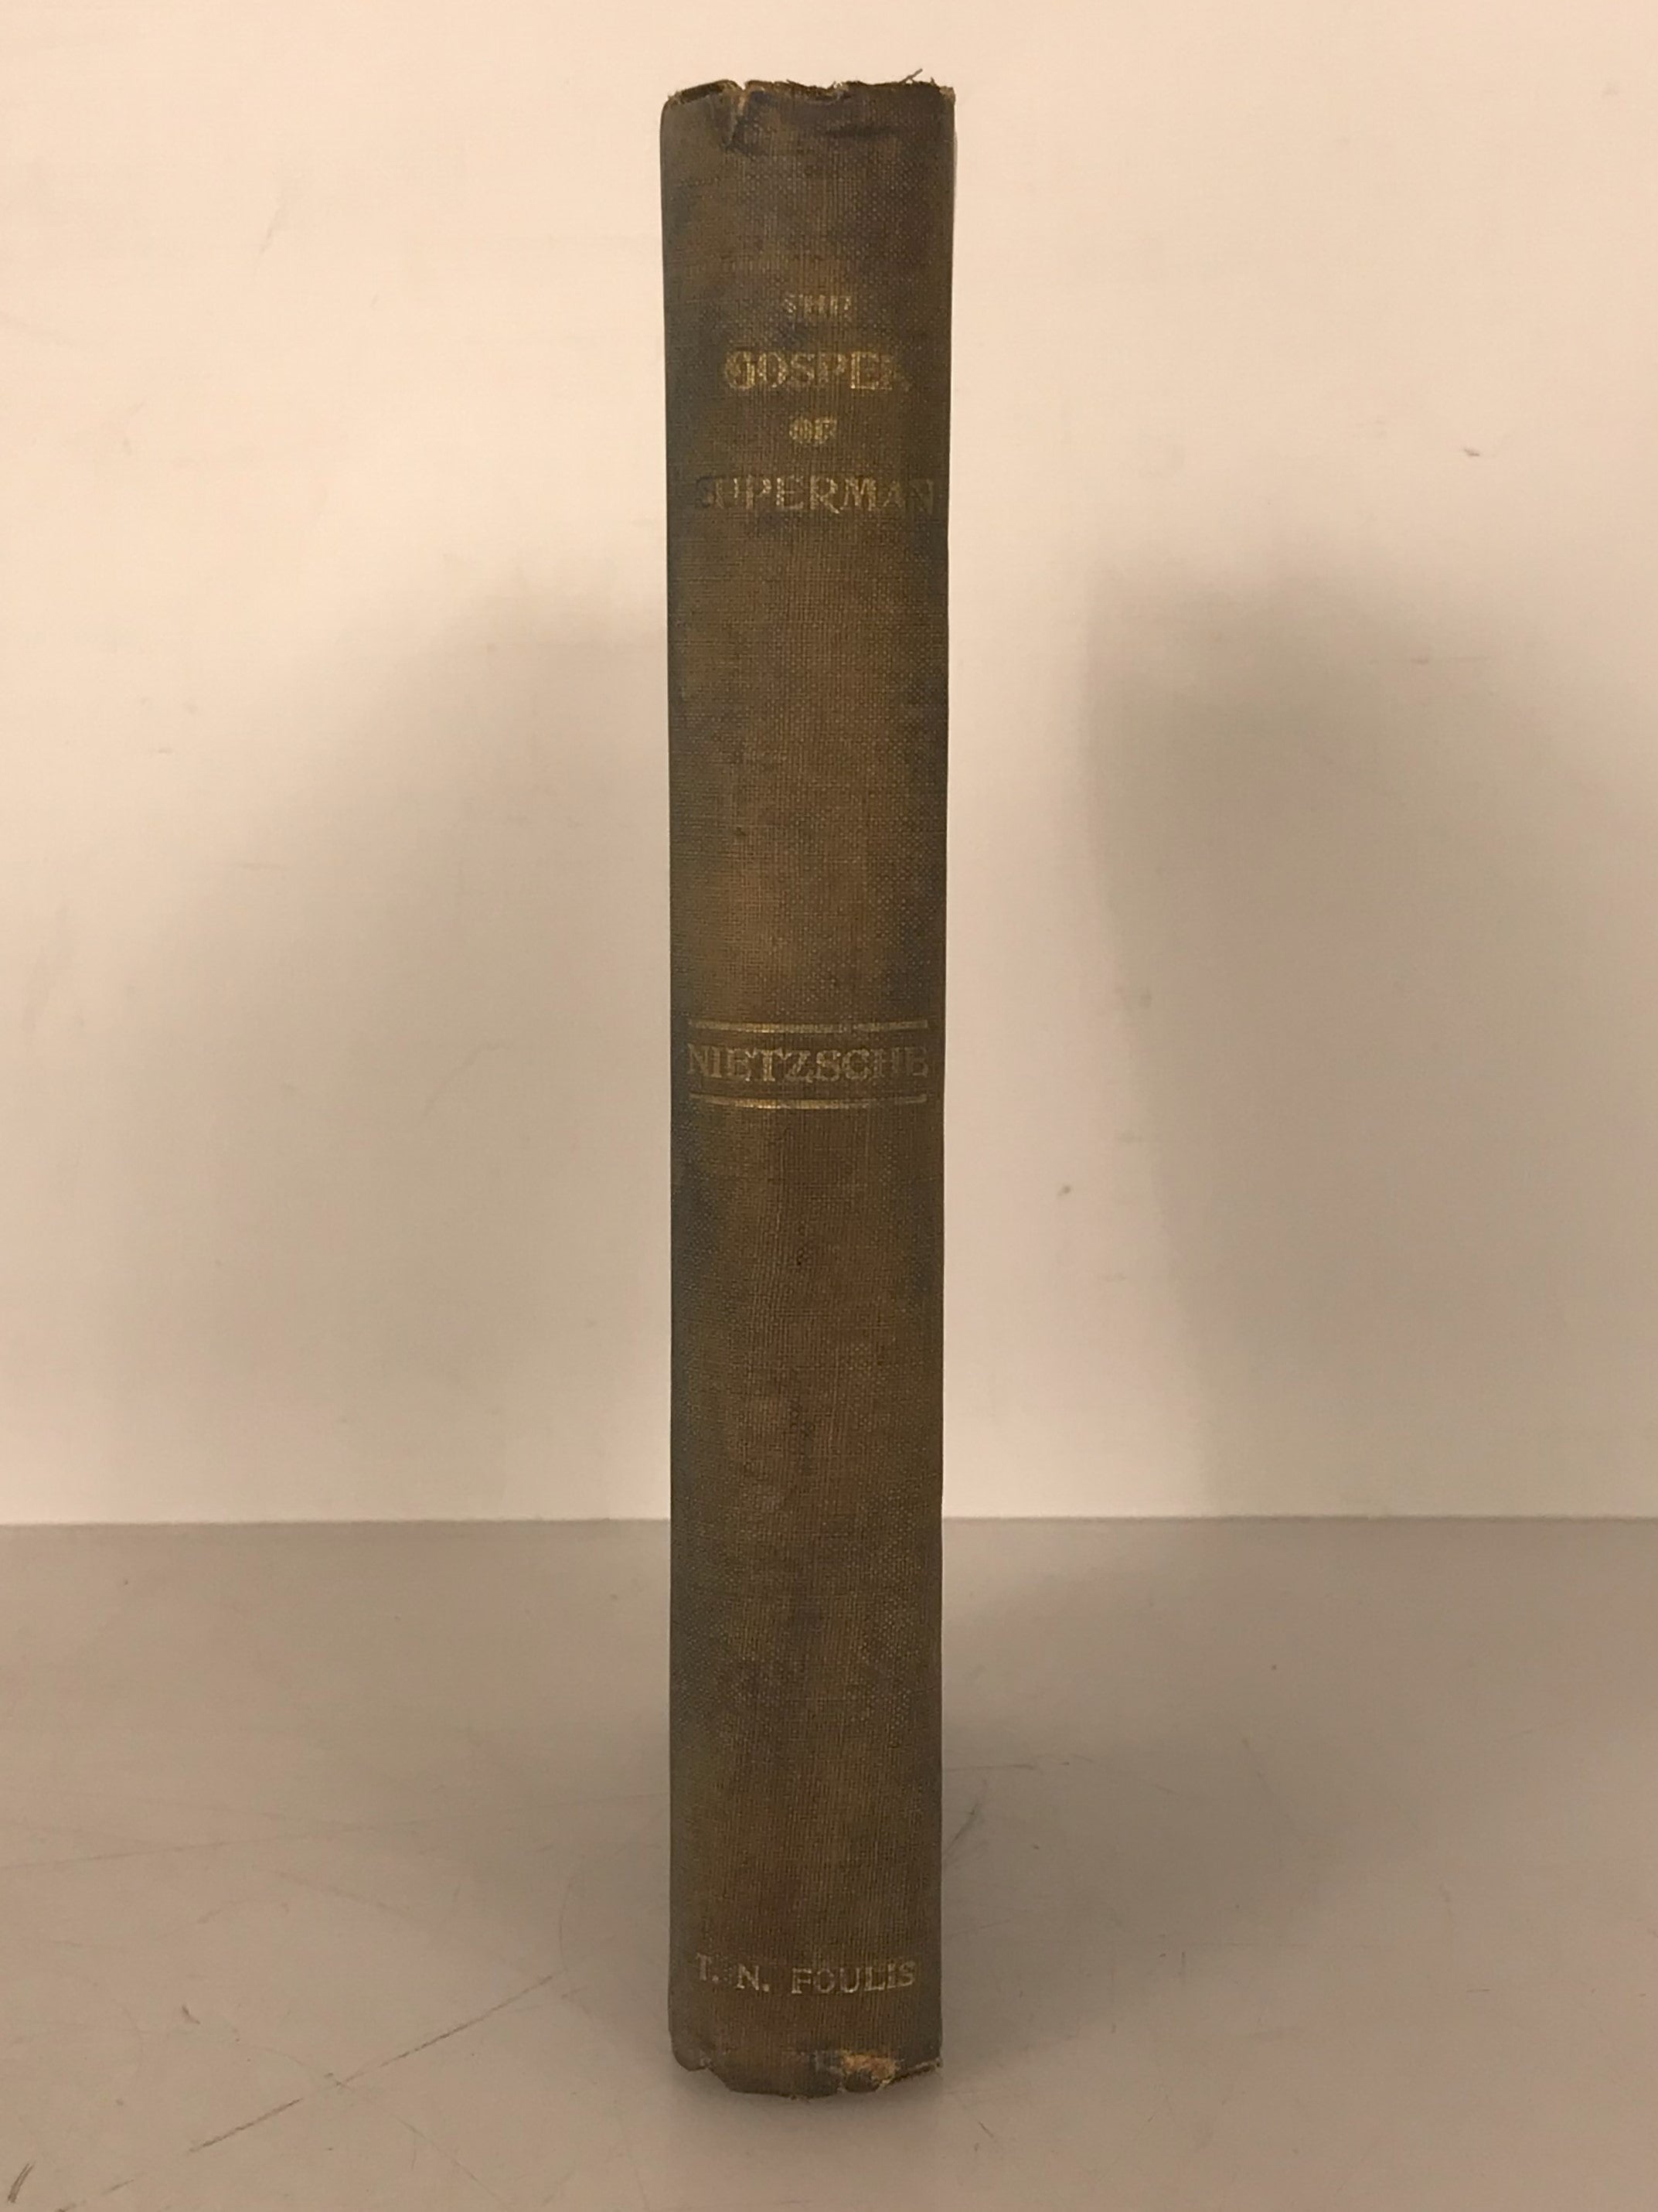 The Gospel of Superman - The Philosophy of Friedrich Nietzsche by JM Kennedy 1910 First Edition 1789 of 2000